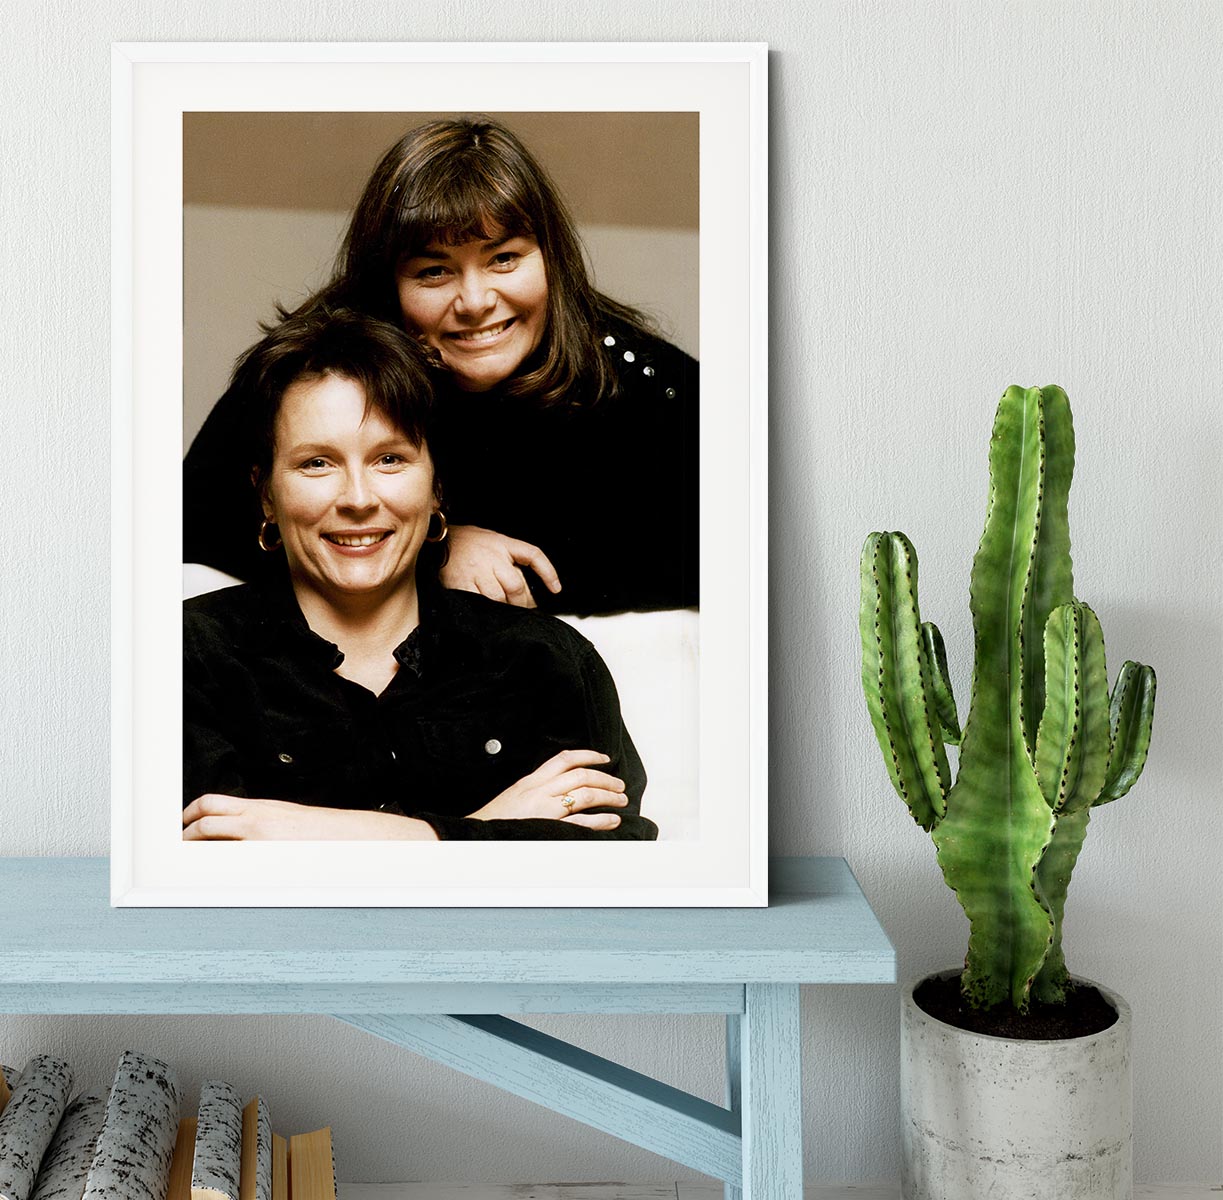 French and Saunders Framed Print - Canvas Art Rocks - 5